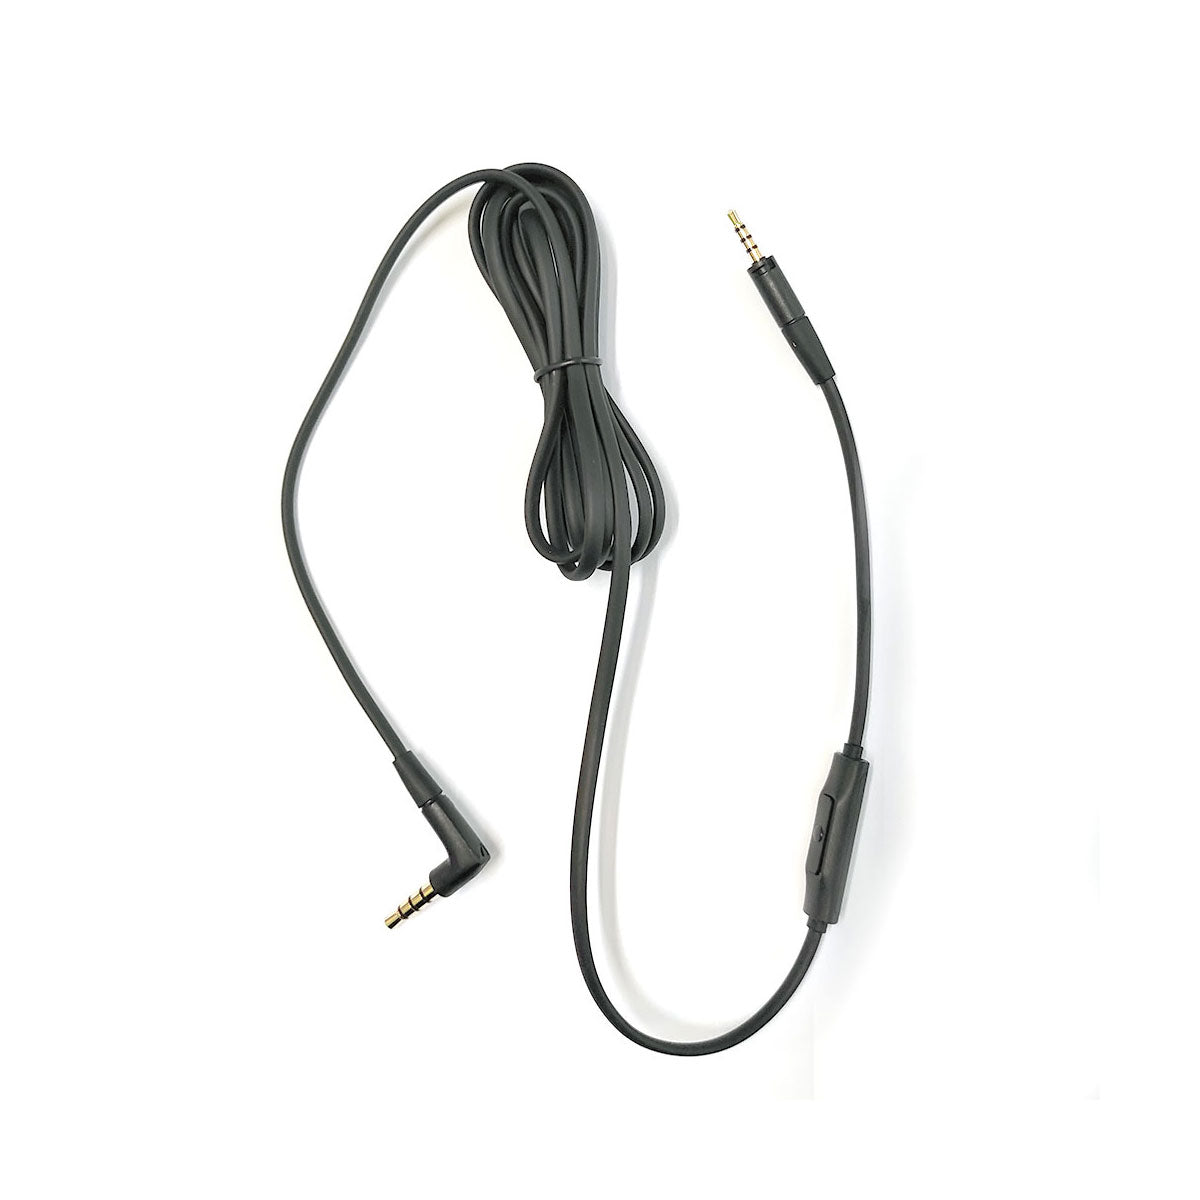 Sennheiser RCS 400 Detachable Single-sided Cable, With 1-Button Remote, 3.5mm Angled Plug, Black